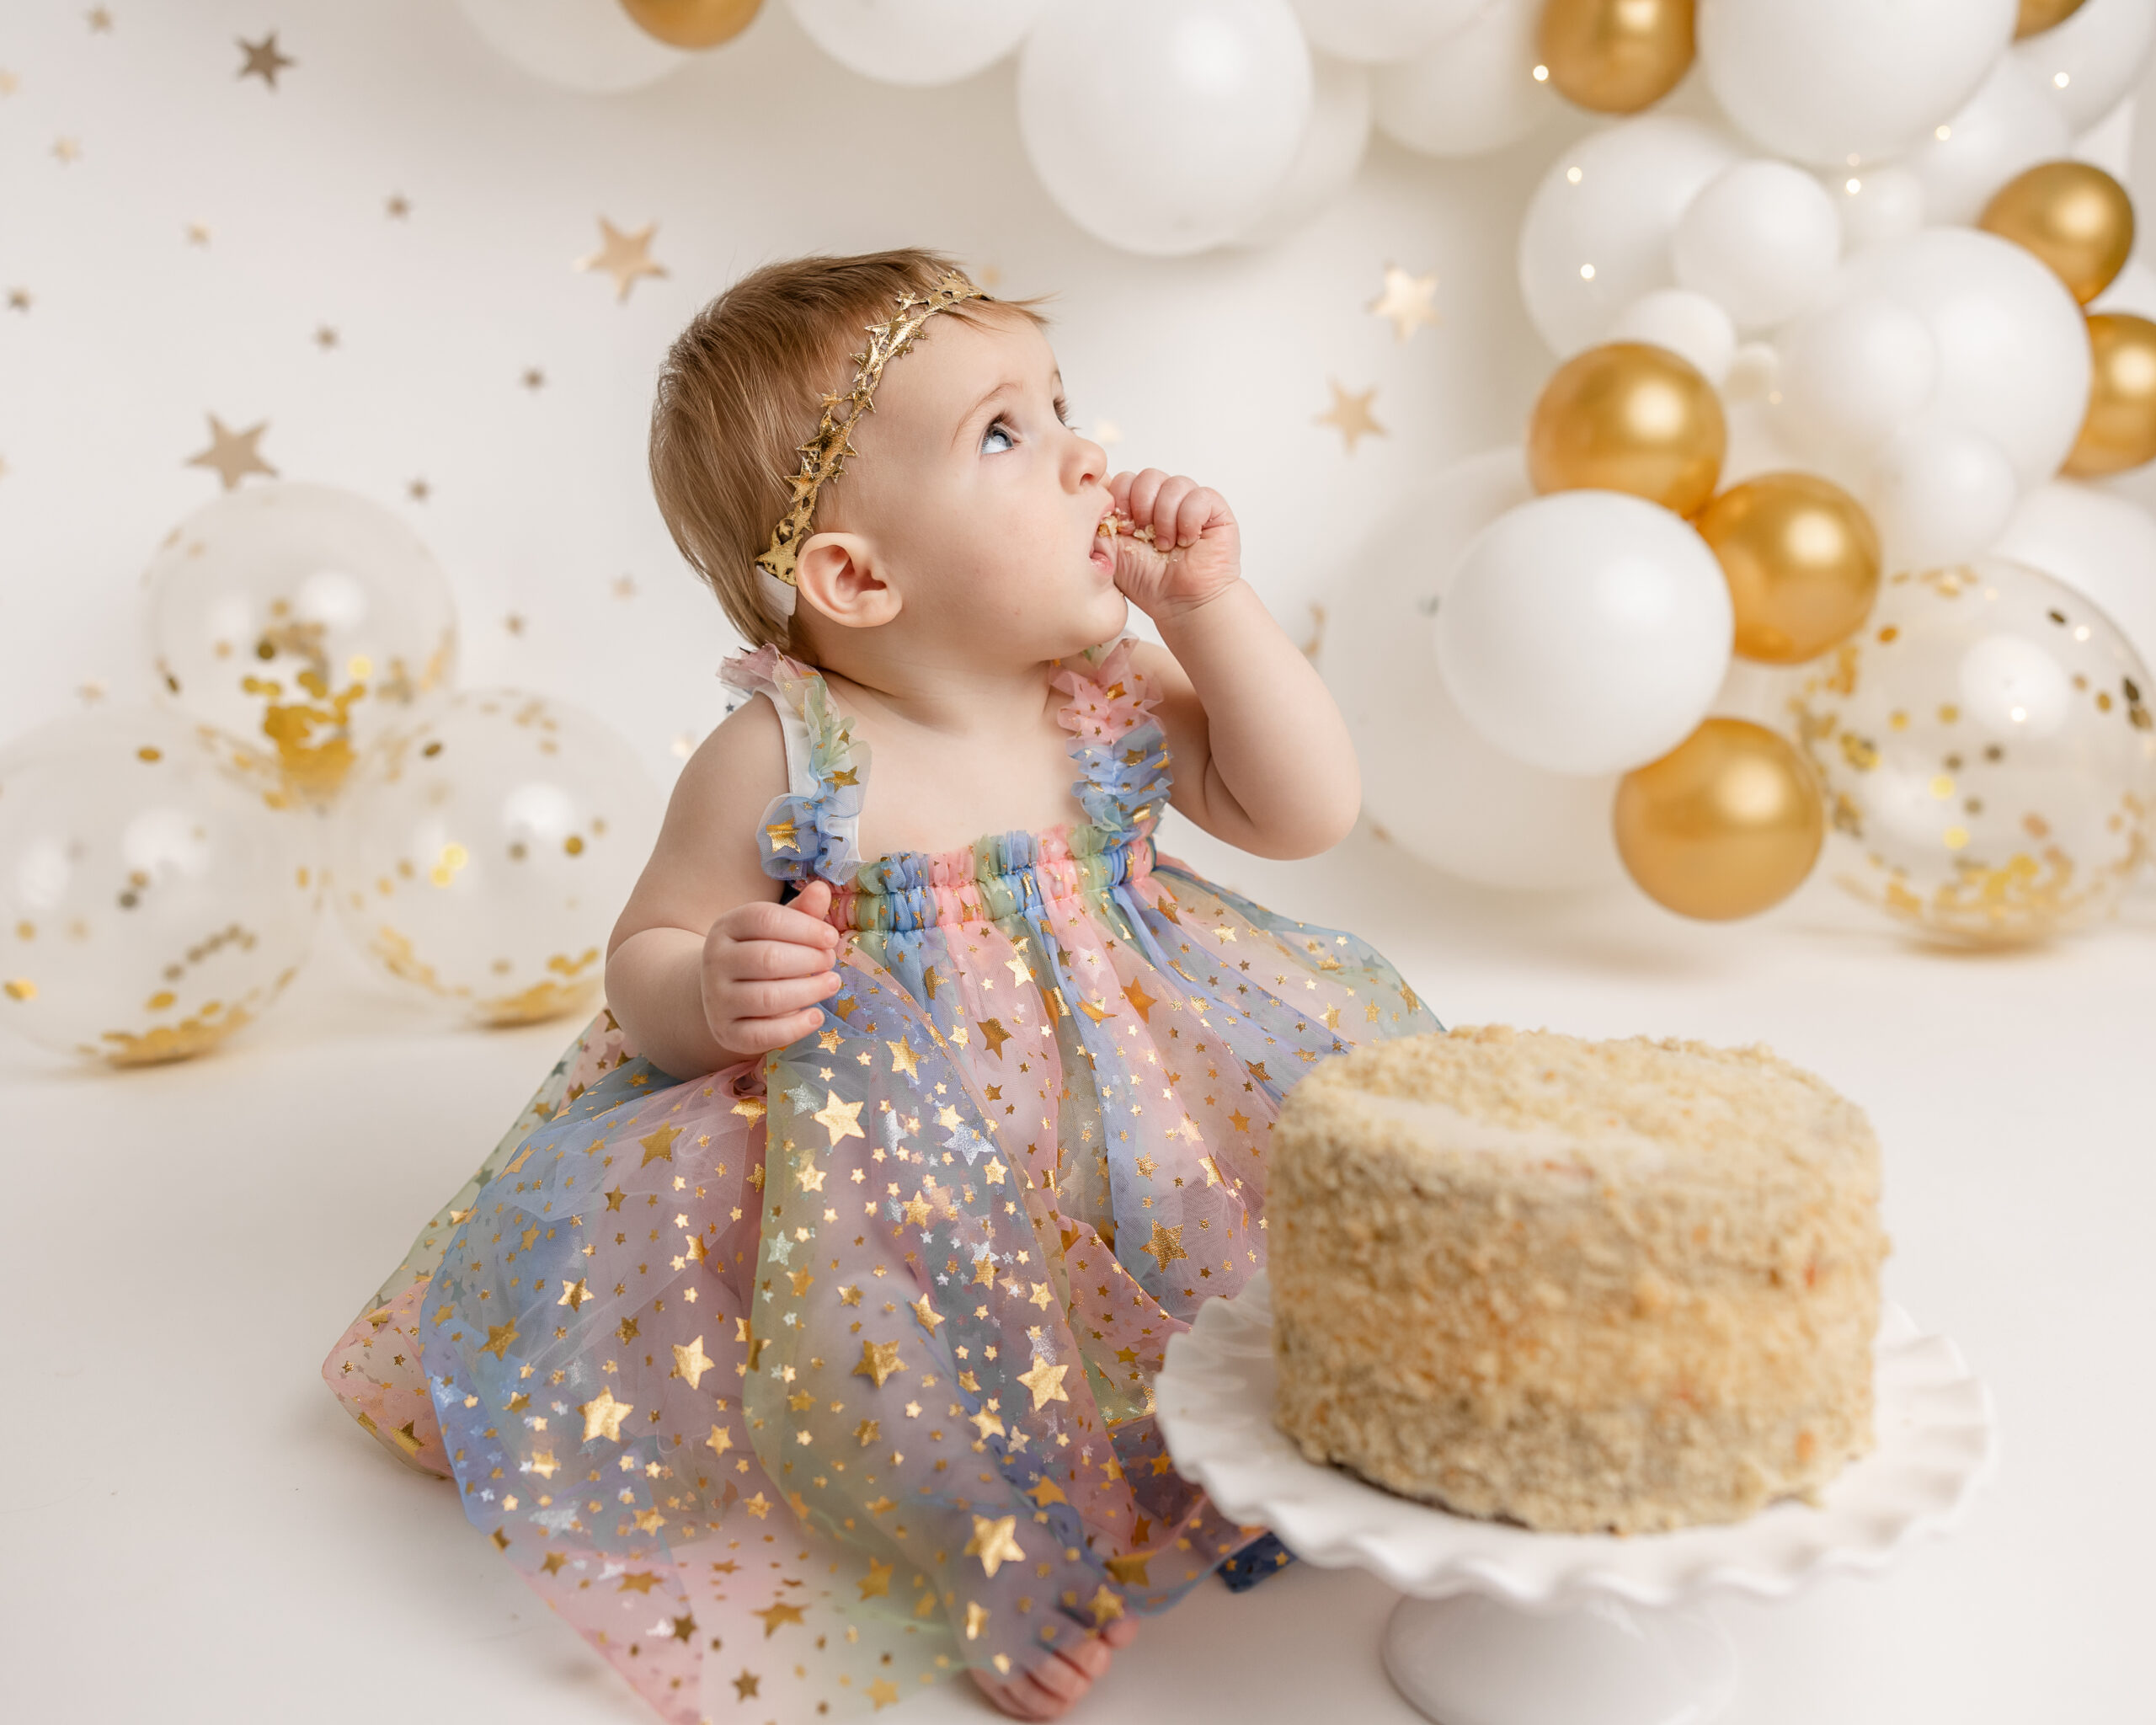 little girl in gold and blue dress celebrating her birthday Oodles of Toys